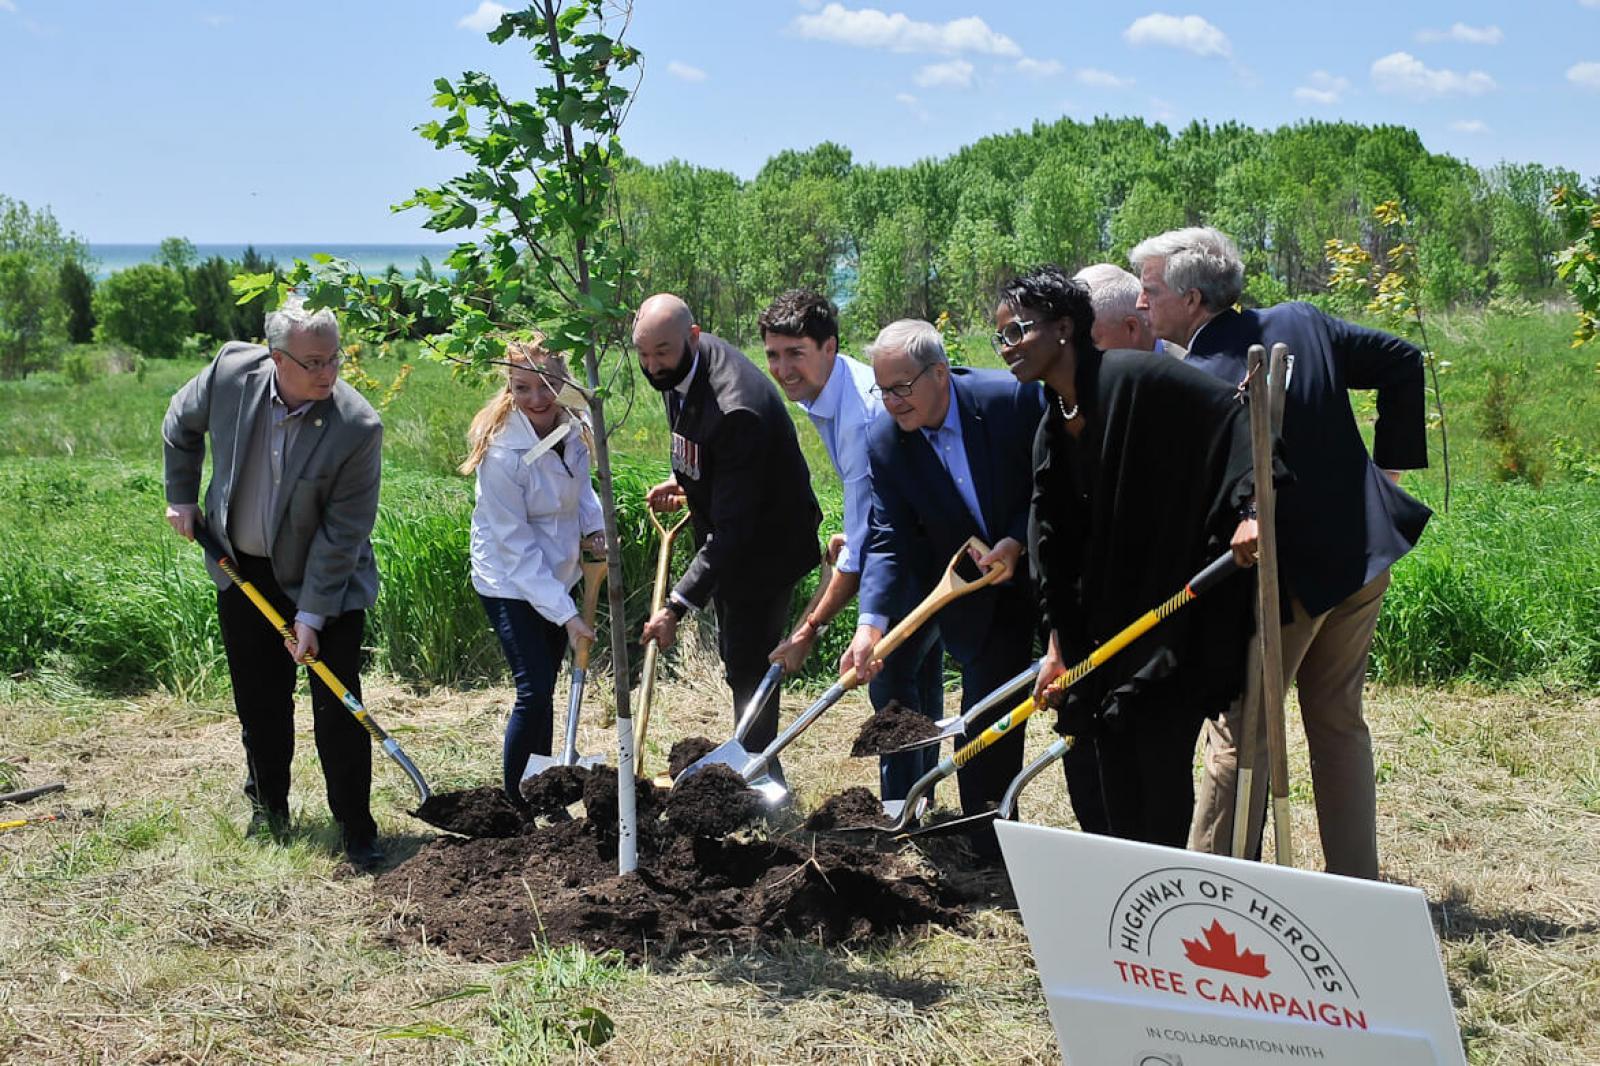 Trudeau takes part in tree planting campaign to commemorate soldiers